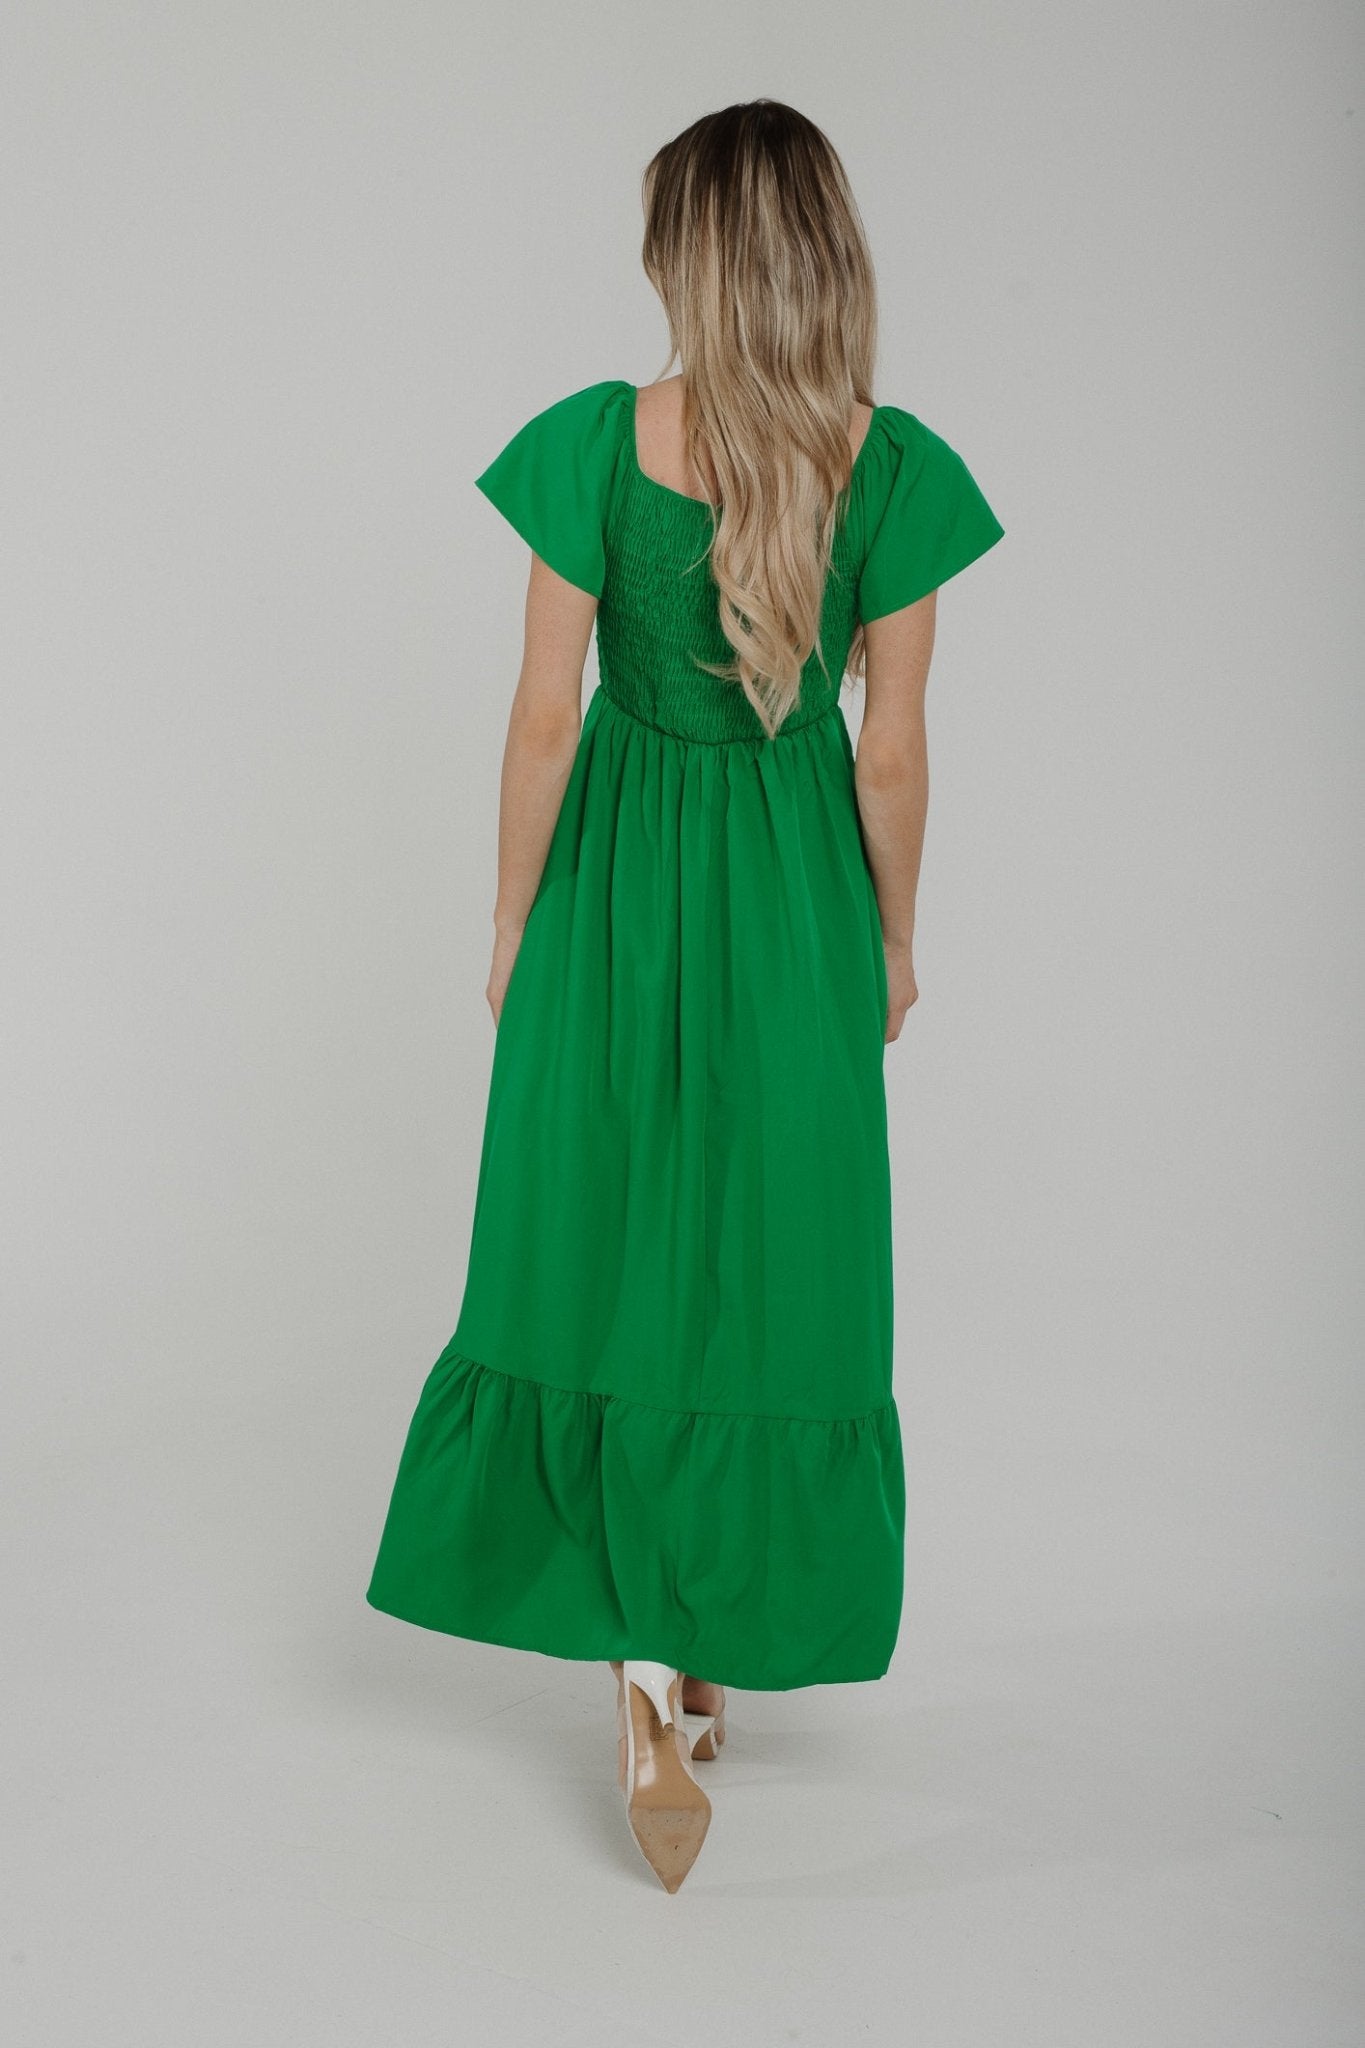 Polly Tiered Dress In Green - The Walk in Wardrobe